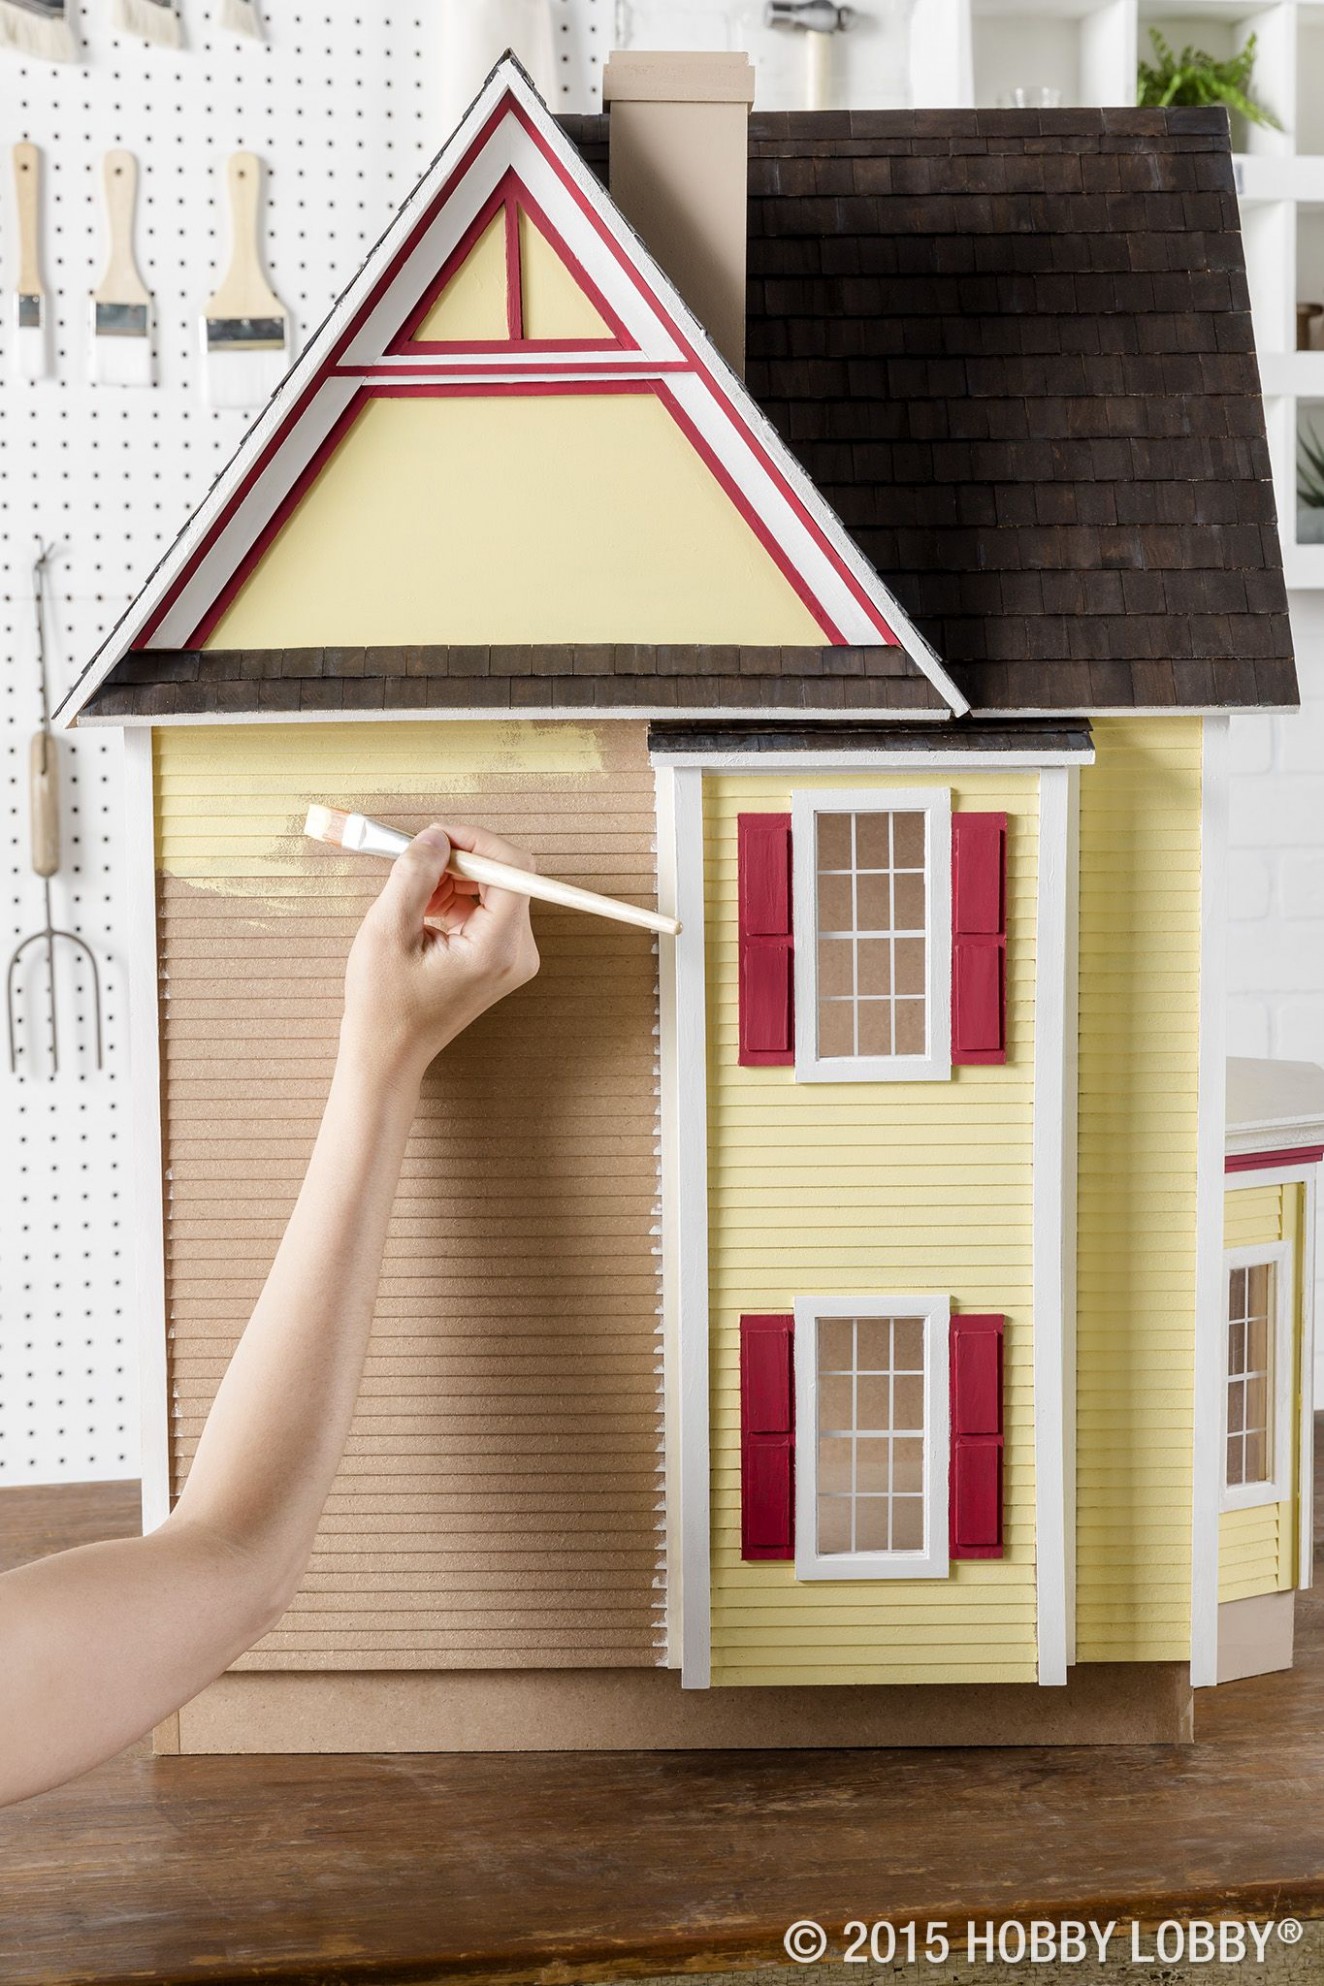 Tips For Painting A Dollhouse: 10) Start Painting At The Top, And ..